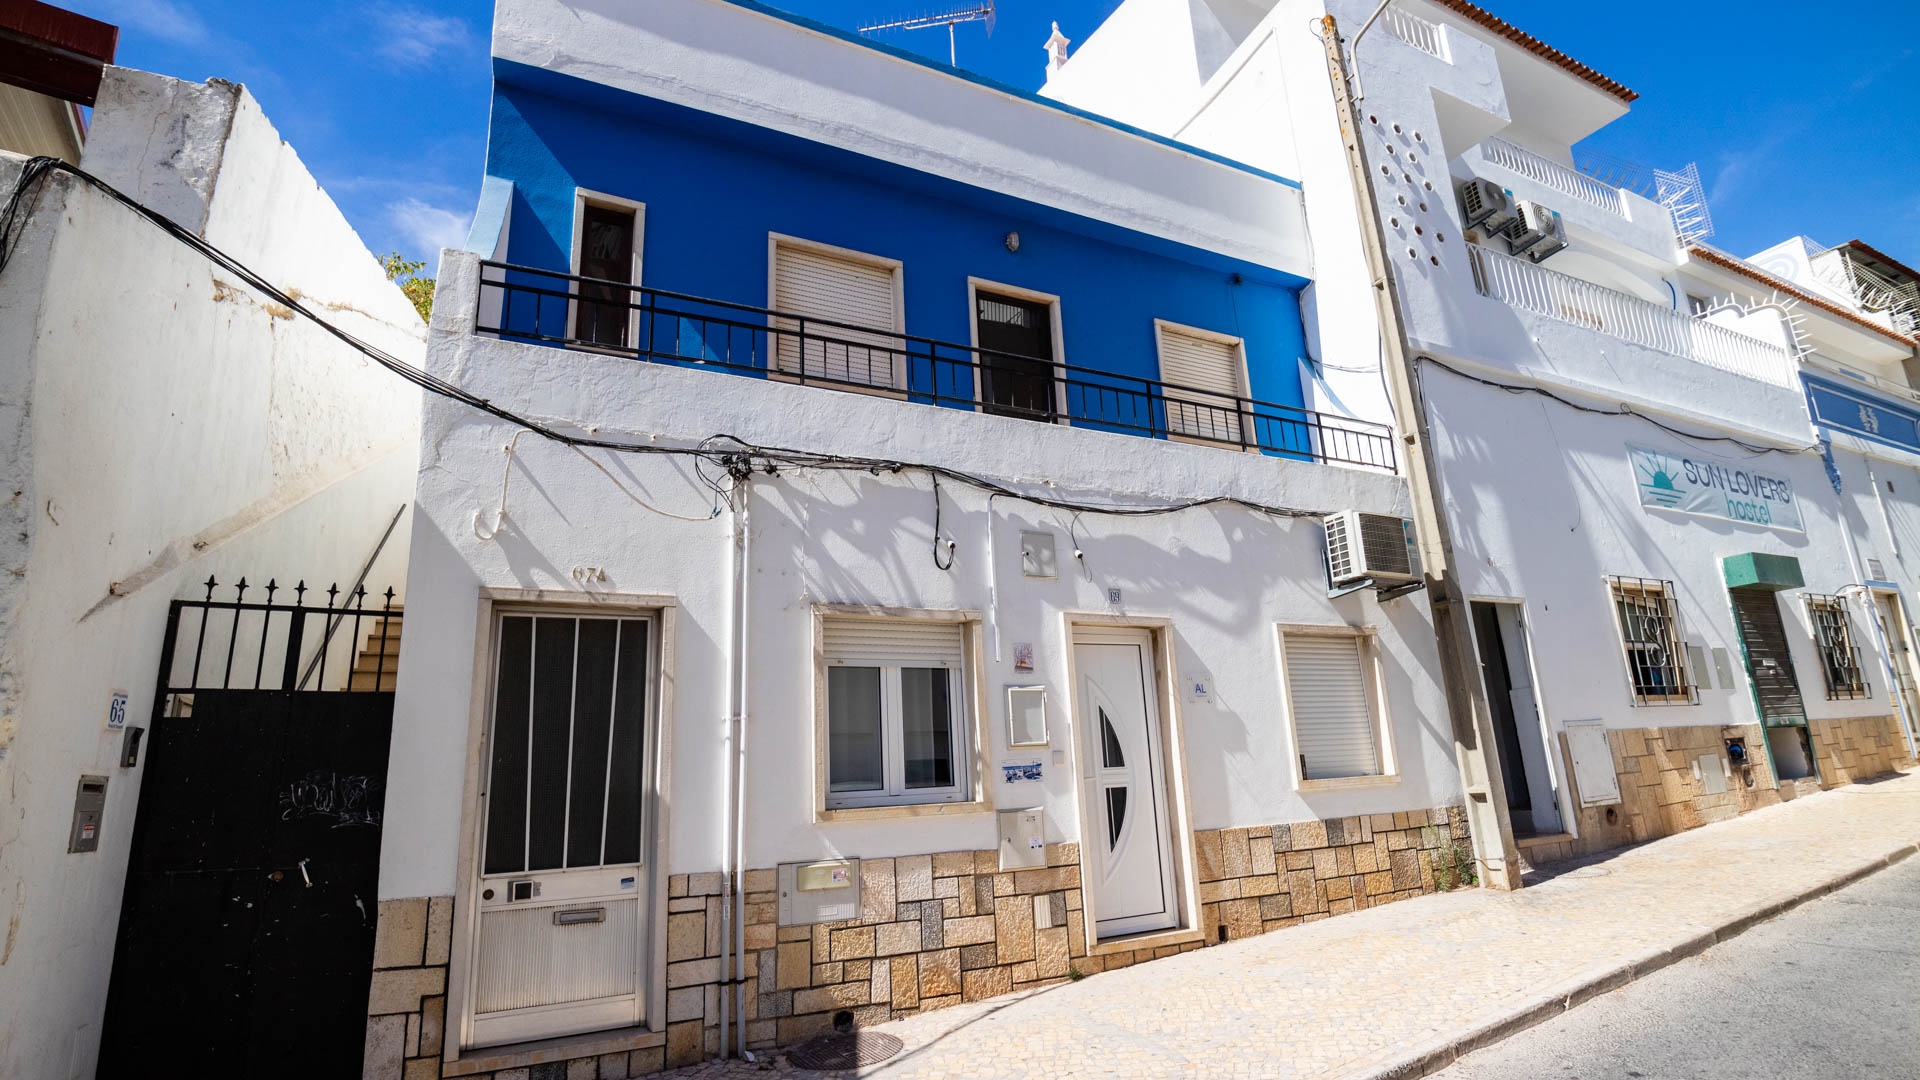 Renovation Project 2 Bedroom Apartment with Huge Roof Terrace in Historical Albufeira Old Town | VM2003 This property is a great investment opportunity in a central location in Albufeira, close to all amenities and once renovated would make a perfect high end holiday rental.